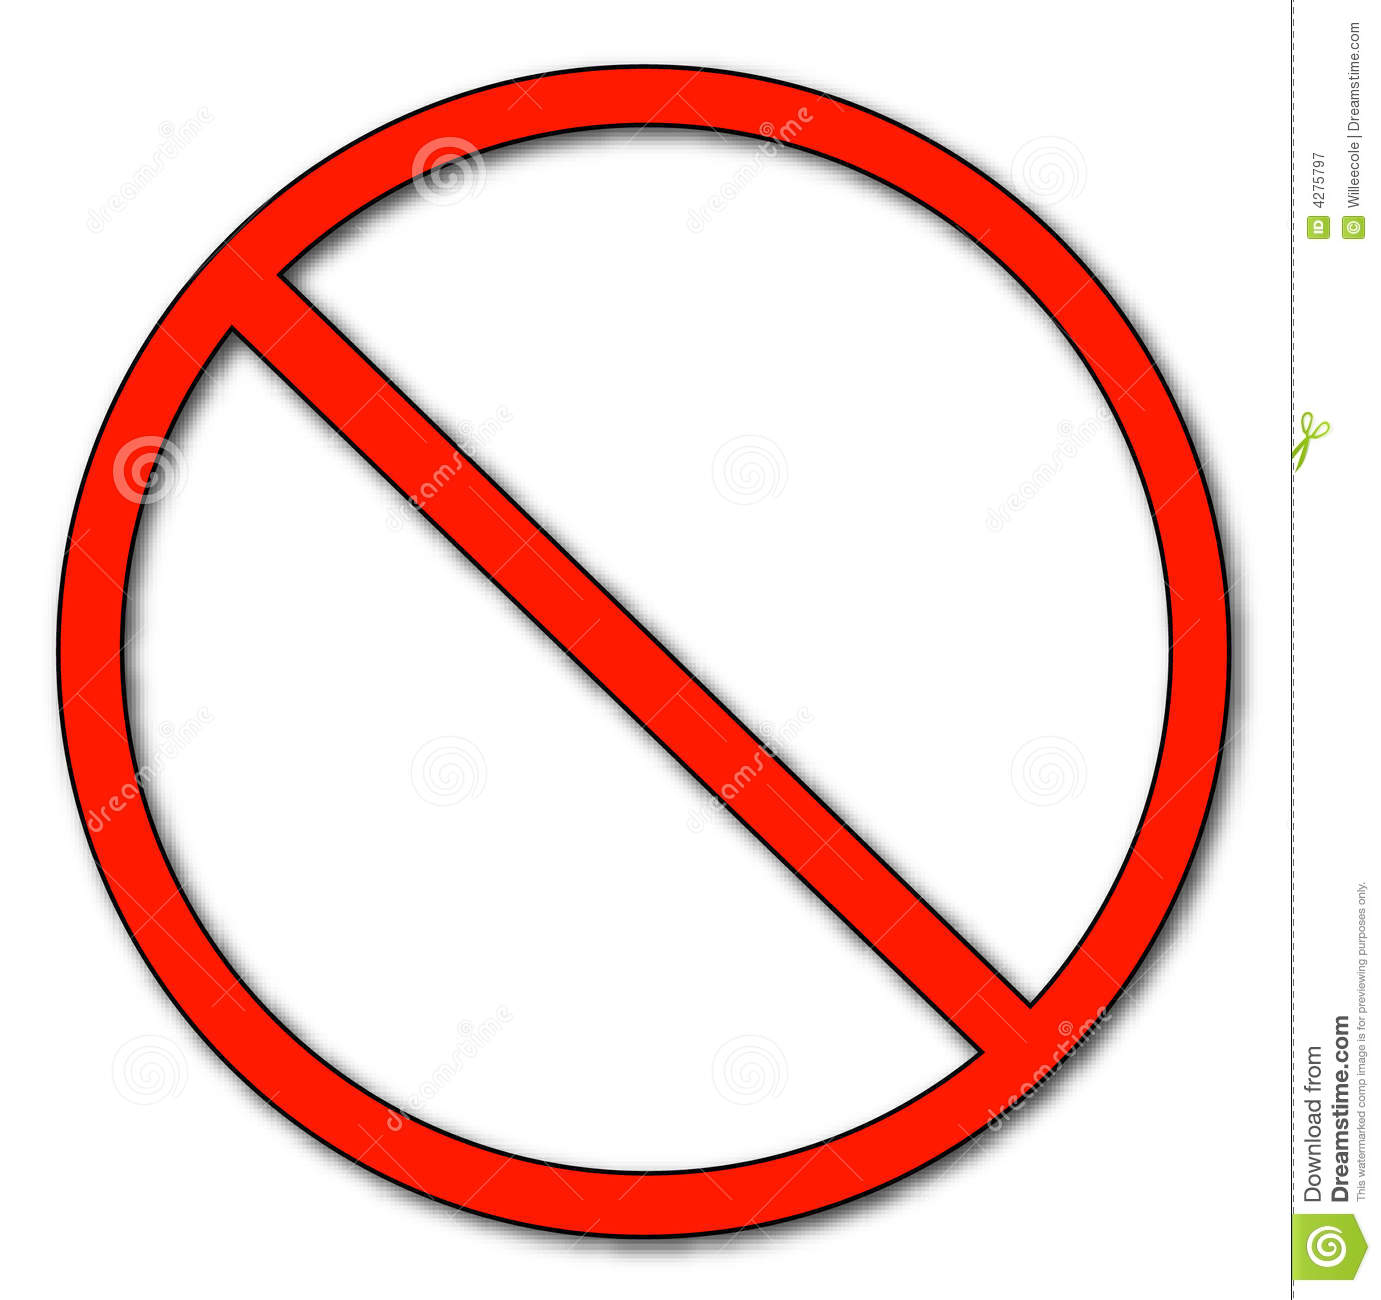 Not Allowed Symbol Royalty Free Stock Photography   Image  4275797